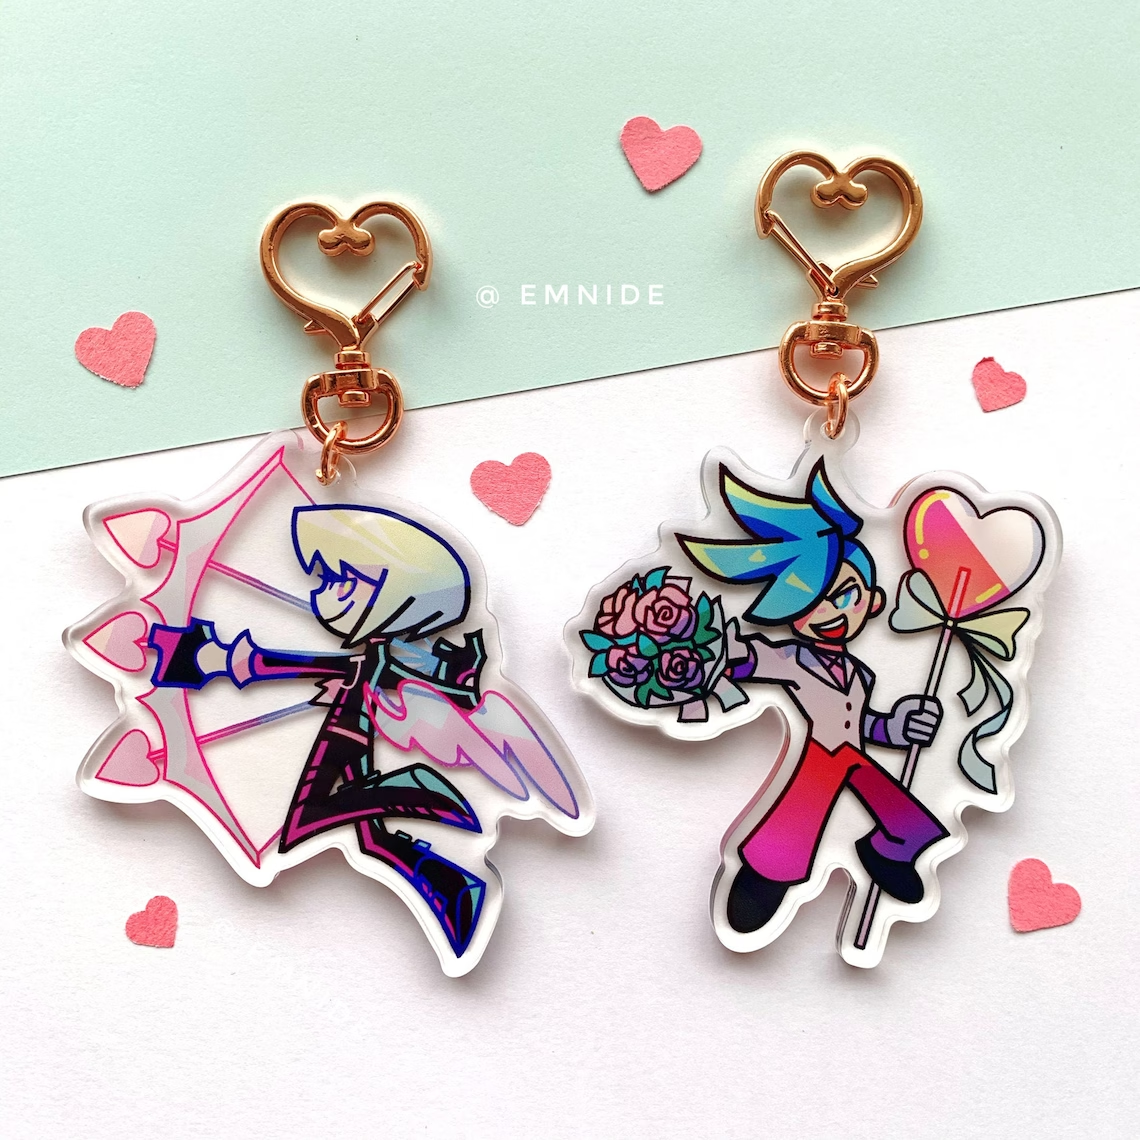 Promare Sweetheart Charms ✧ Studio Trigger